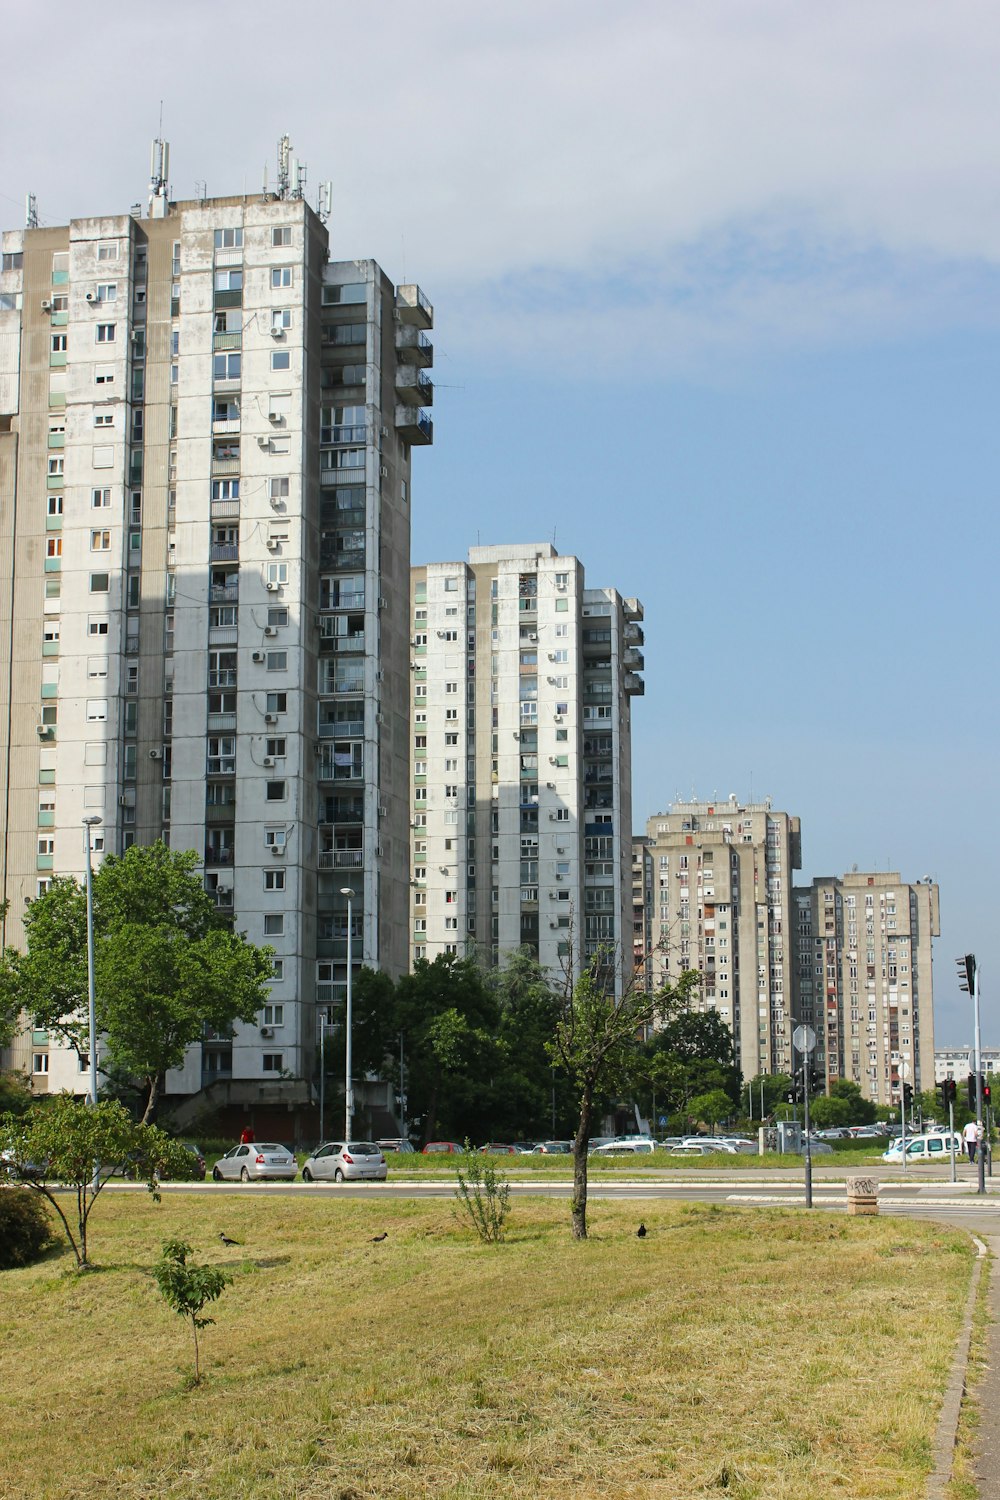 a grassy field in front of tall buildings